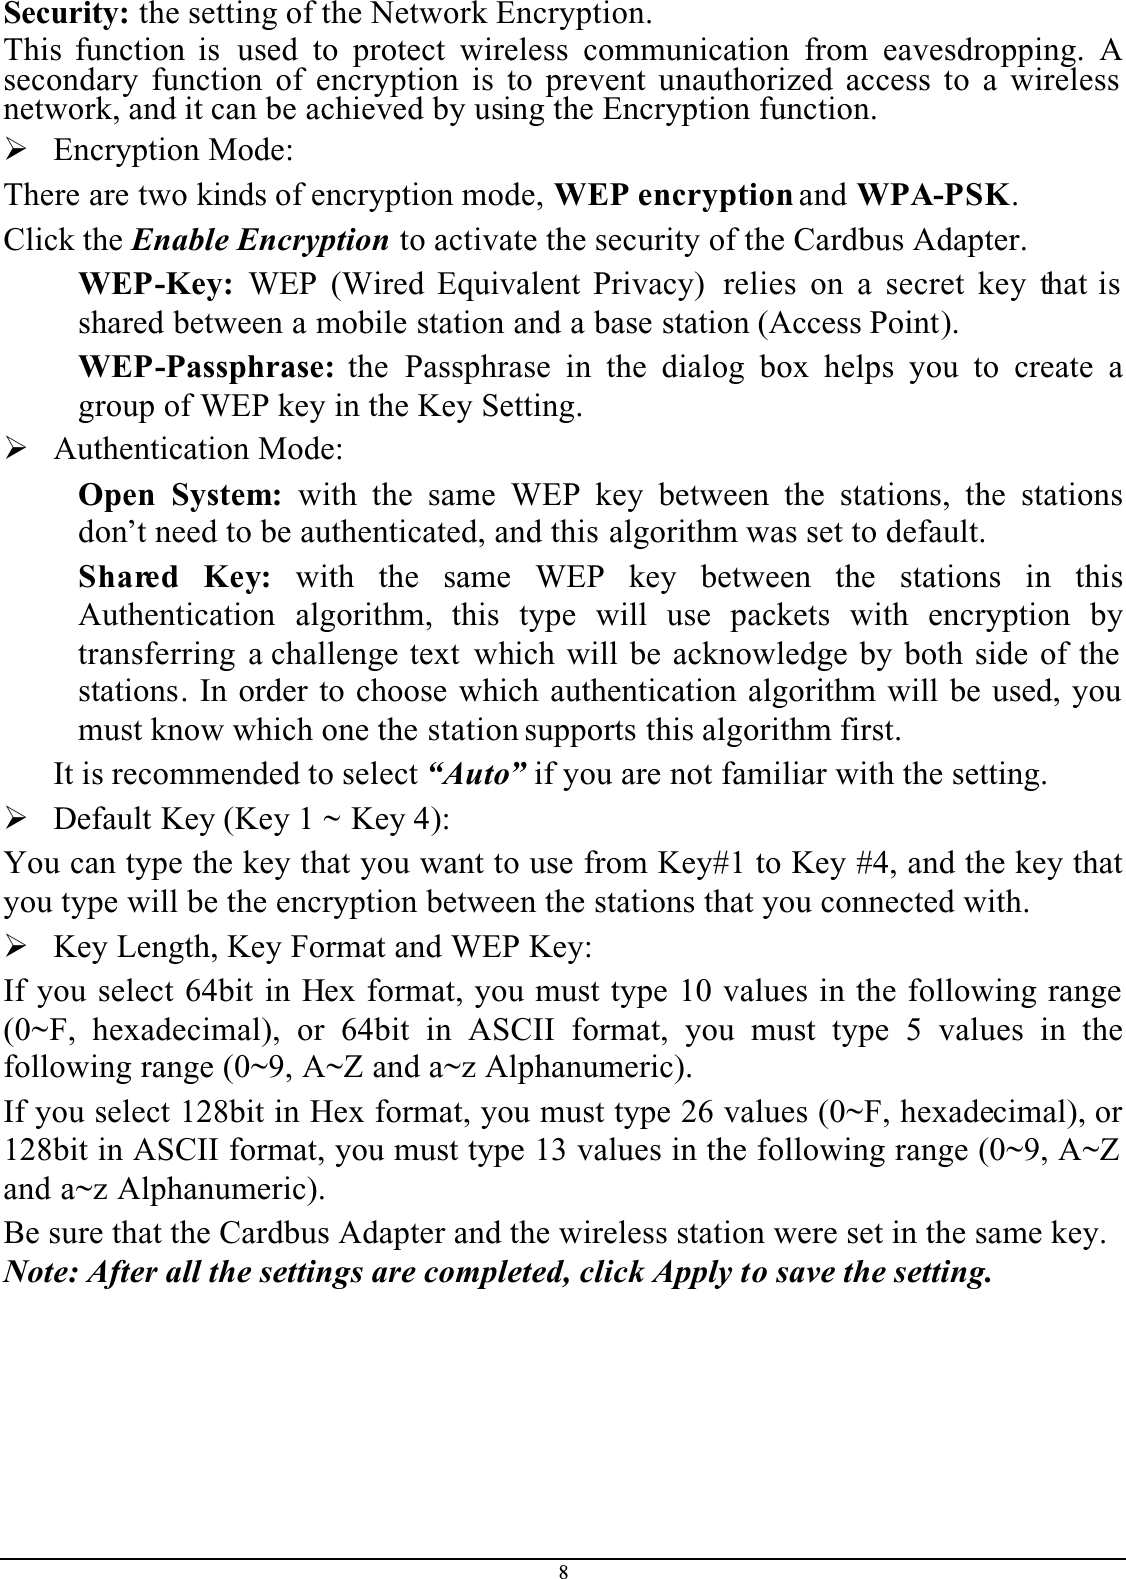 8Security: the setting of the Network Encryption.This function is used to protect wireless communication from eavesdropping. Asecondary function of encryption is to prevent unauthorized access to a wireless network, and it can be achieved by using the Encryption function.¾Encryption Mode: There are two kinds of encryption mode, WEP encryption and WPA-PSK.Click the Enable Encryption to activate the security of the Cardbus Adapter.WEP-Key: WEP (Wired Equivalent Privacy)  relies on a secret key that is shared between a mobile station and a base station (Access Point).WEP-Passphrase: the Passphrase in the dialog box helps you to create agroup of WEP key in the Key Setting.¾Authentication Mode: Open System: with the same WEP key between the stations, the stationsdon’t need to be authenticated, and this algorithm was set to default.Shared Key: with the same WEP key between the stations in thisAuthentication algorithm, this type will use packets with encryption bytransferring a challenge text which will be acknowledge by both side of the stations. In order to choose which authentication algorithm will be used, you must know which one the station supports this algorithm first.It is recommended to select “Auto” if you are not familiar with the setting.¾Default Key (Key 1 ~ Key 4):You can type the key that you want to use from Key#1 to Key #4, and the key that you type will be the encryption between the stations that you connected with. ¾Key Length, Key Format and WEP Key:If you select 64bit in Hex format, you must type 10 values in the following range (0~F, hexadecimal), or 64bit in ASCII format, you must type 5 values in thefollowing range (0~9, A~Z and a~z Alphanumeric). If you select 128bit in Hex format, you must type 26 values (0~F, hexadecimal), or 128bit in ASCII format, you must type 13 values in the following range (0~9, A~Z and a~z Alphanumeric).Be sure that the Cardbus Adapter and the wireless station were set in the same key.Note: After all the settings are completed, click Apply to save the setting.